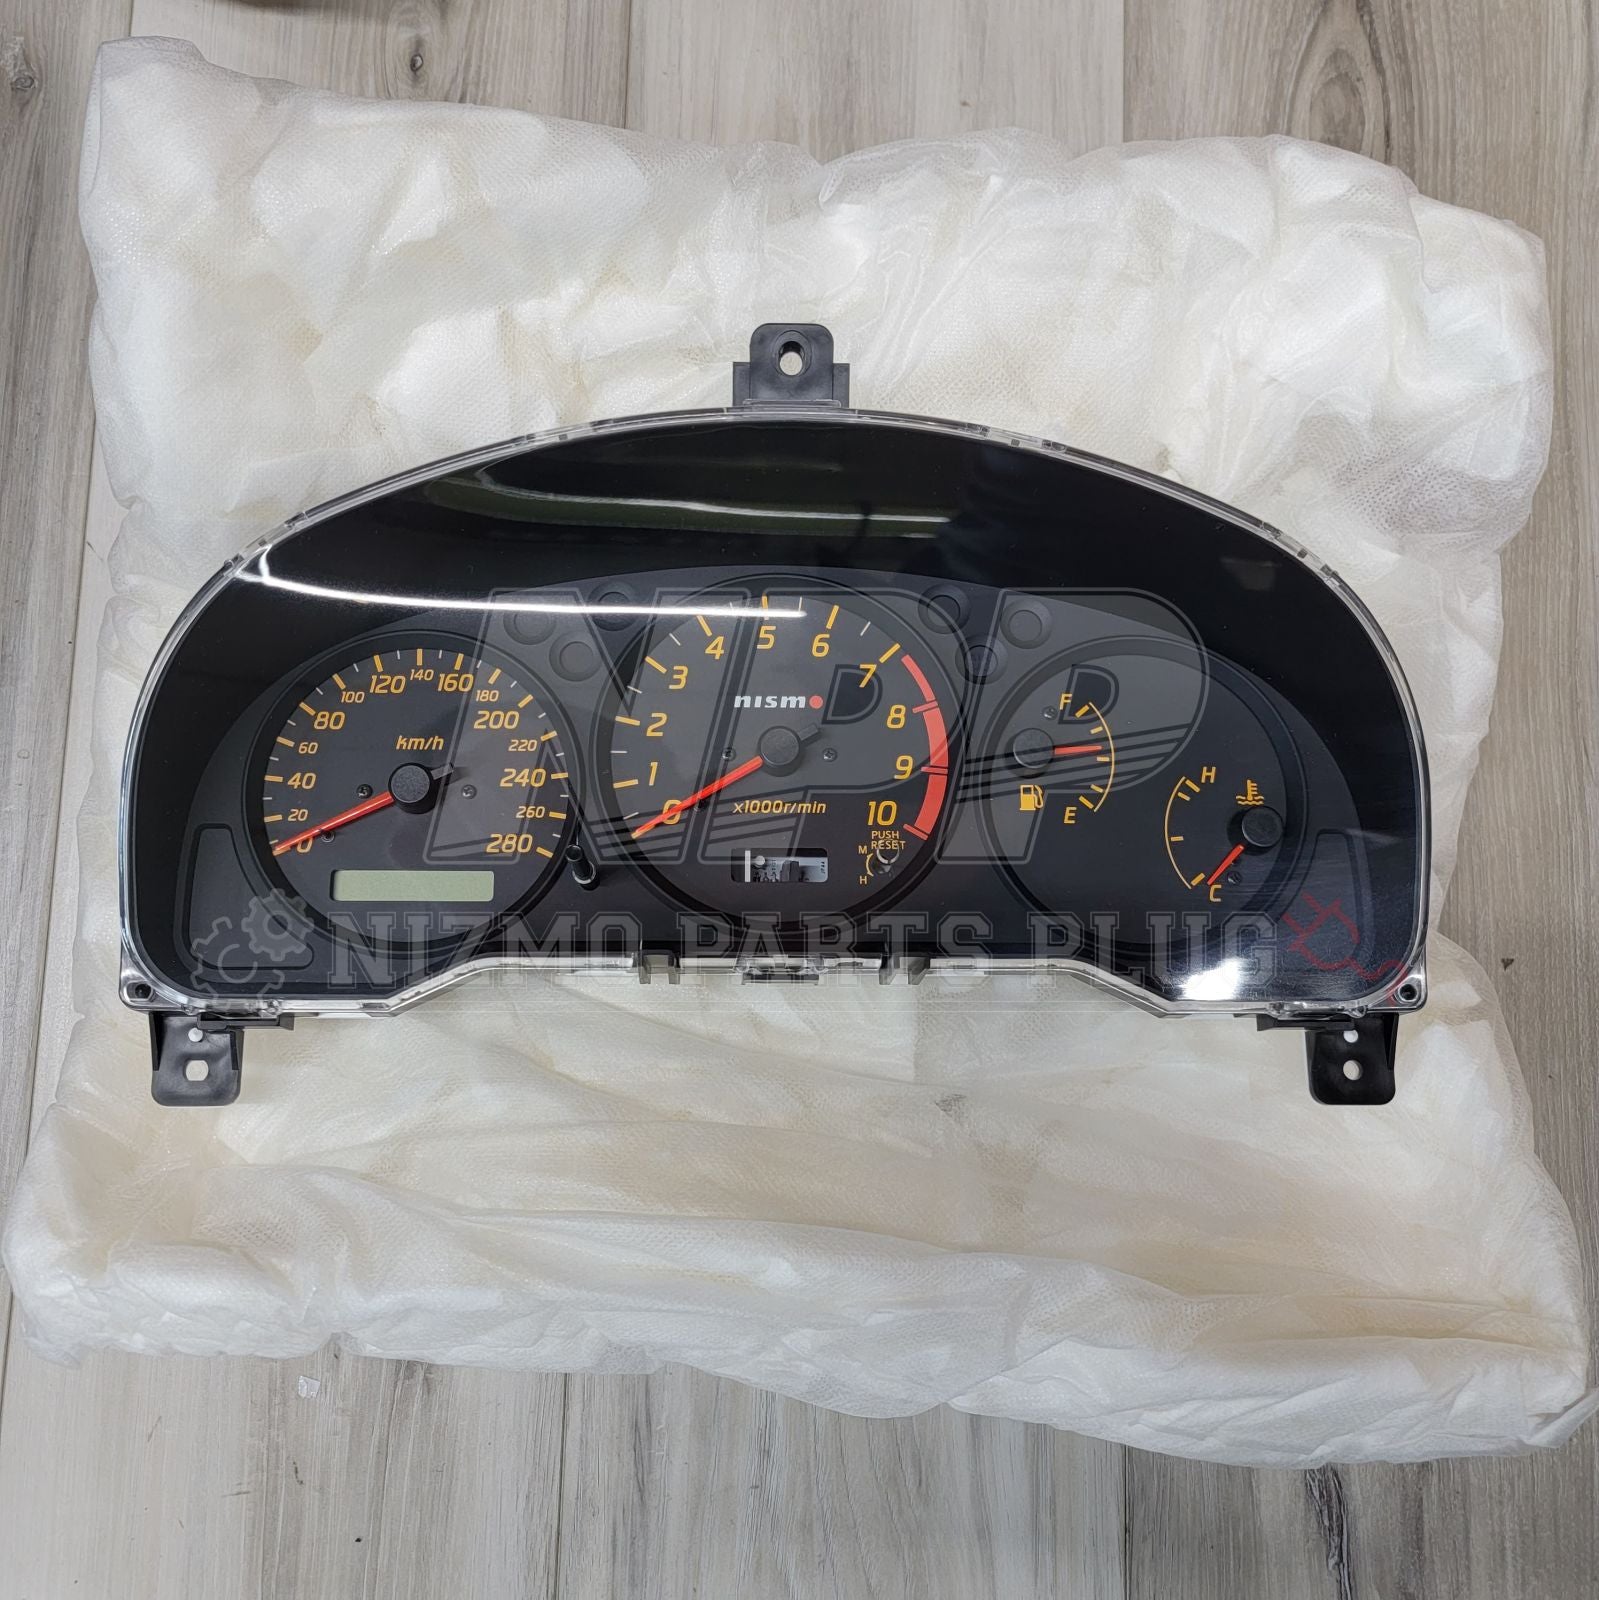 S15 Silvia Nismo Combination Meter Assembly